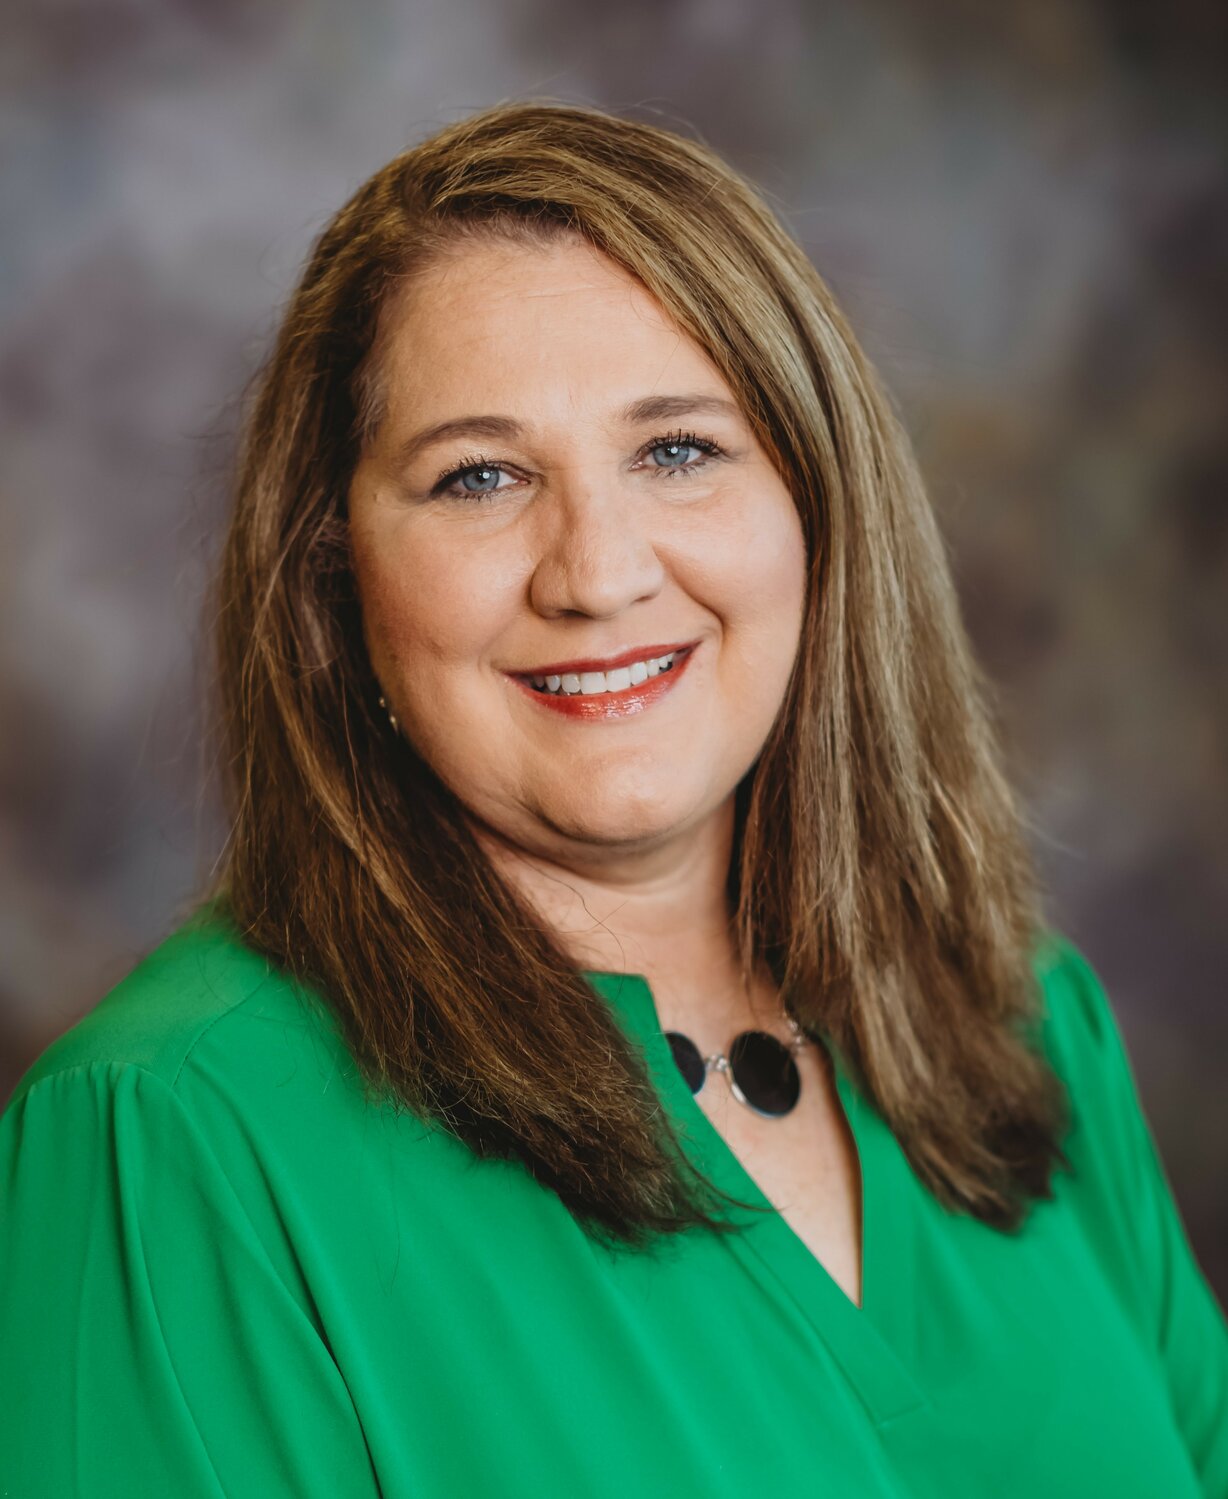 Bedford County School District recently appointed Whitney Yoes to serve as the new principal of Cartwright Elementary in Shelbyville. The K-5 school is currently under construction and set to open in 2024.